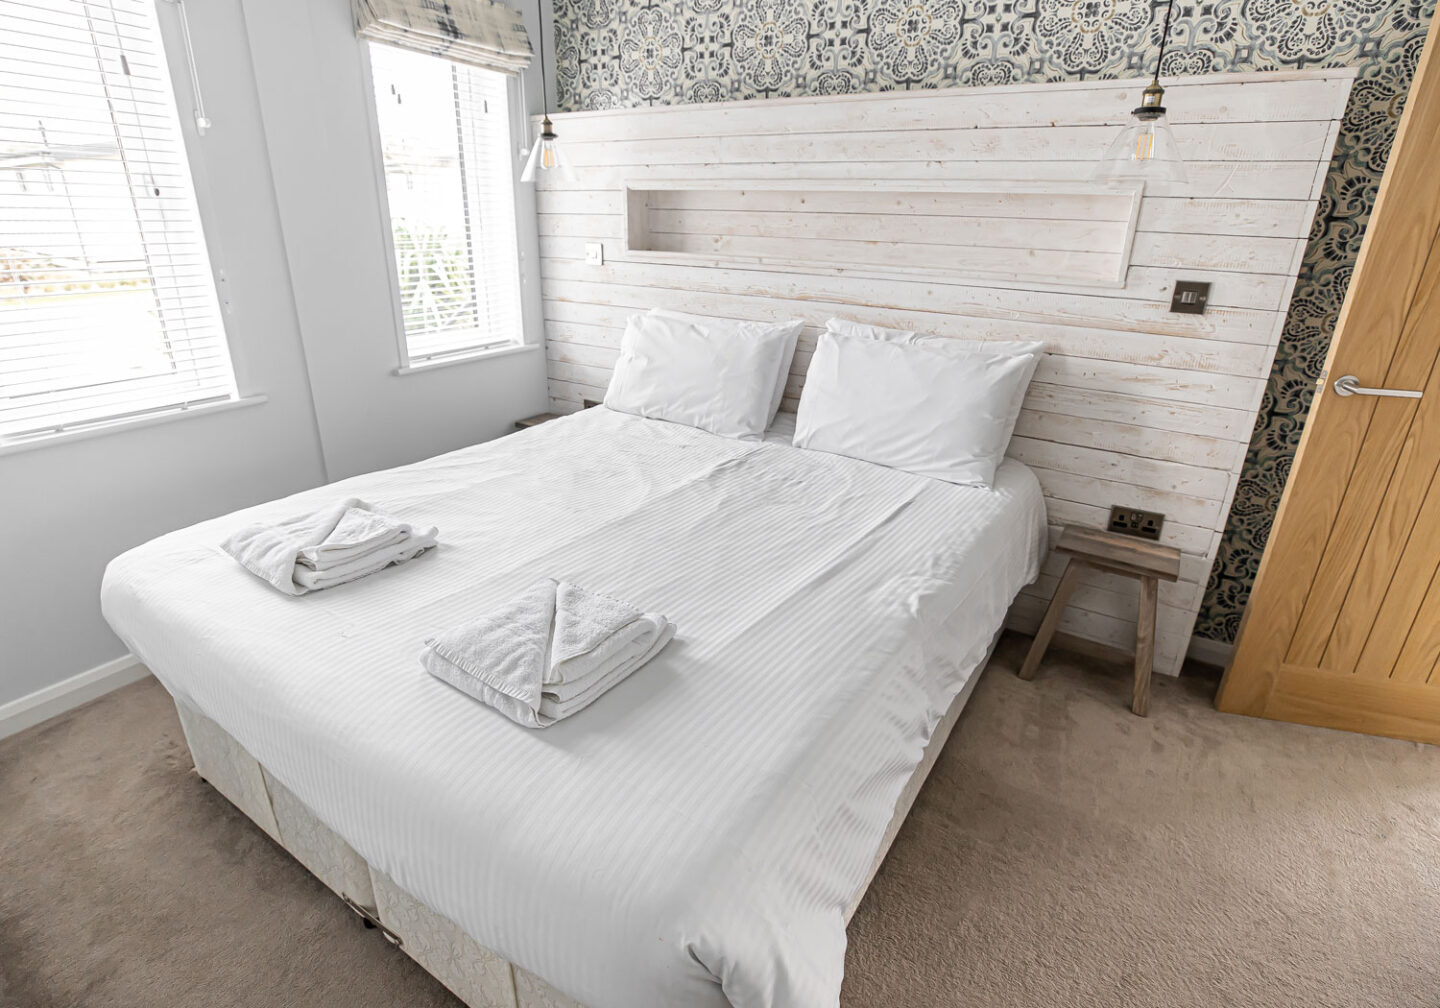 A bright and cozy bedroom featuring a neatly made double bed with crisp white linens and two sets of folded towels. The room has a rustic yet modern design with a whitewashed wooden headboard and decorative wallpaper. Natural light streams in through two large windows, creating a serene and inviting atmosphere.